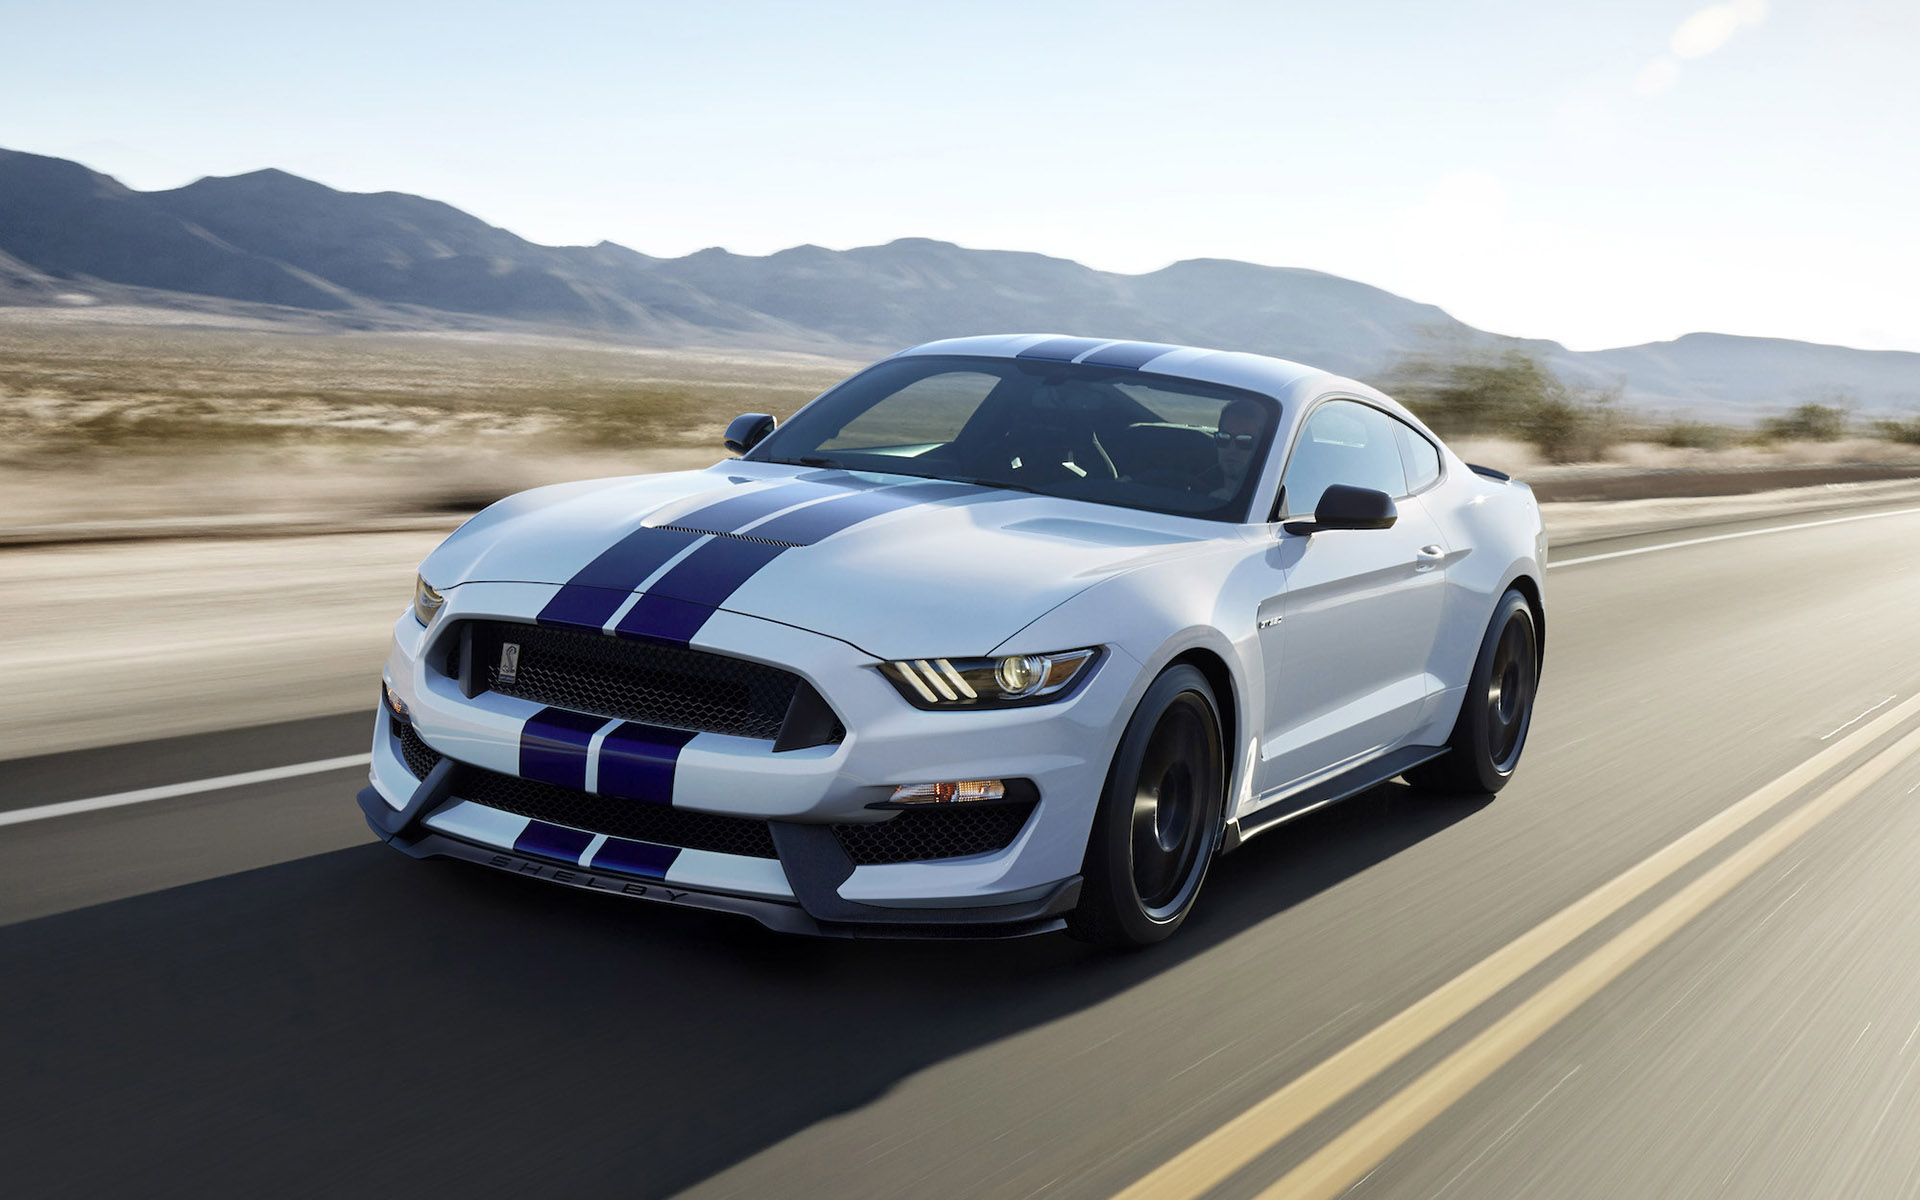 Ford Mustang 2015 Wallpapers